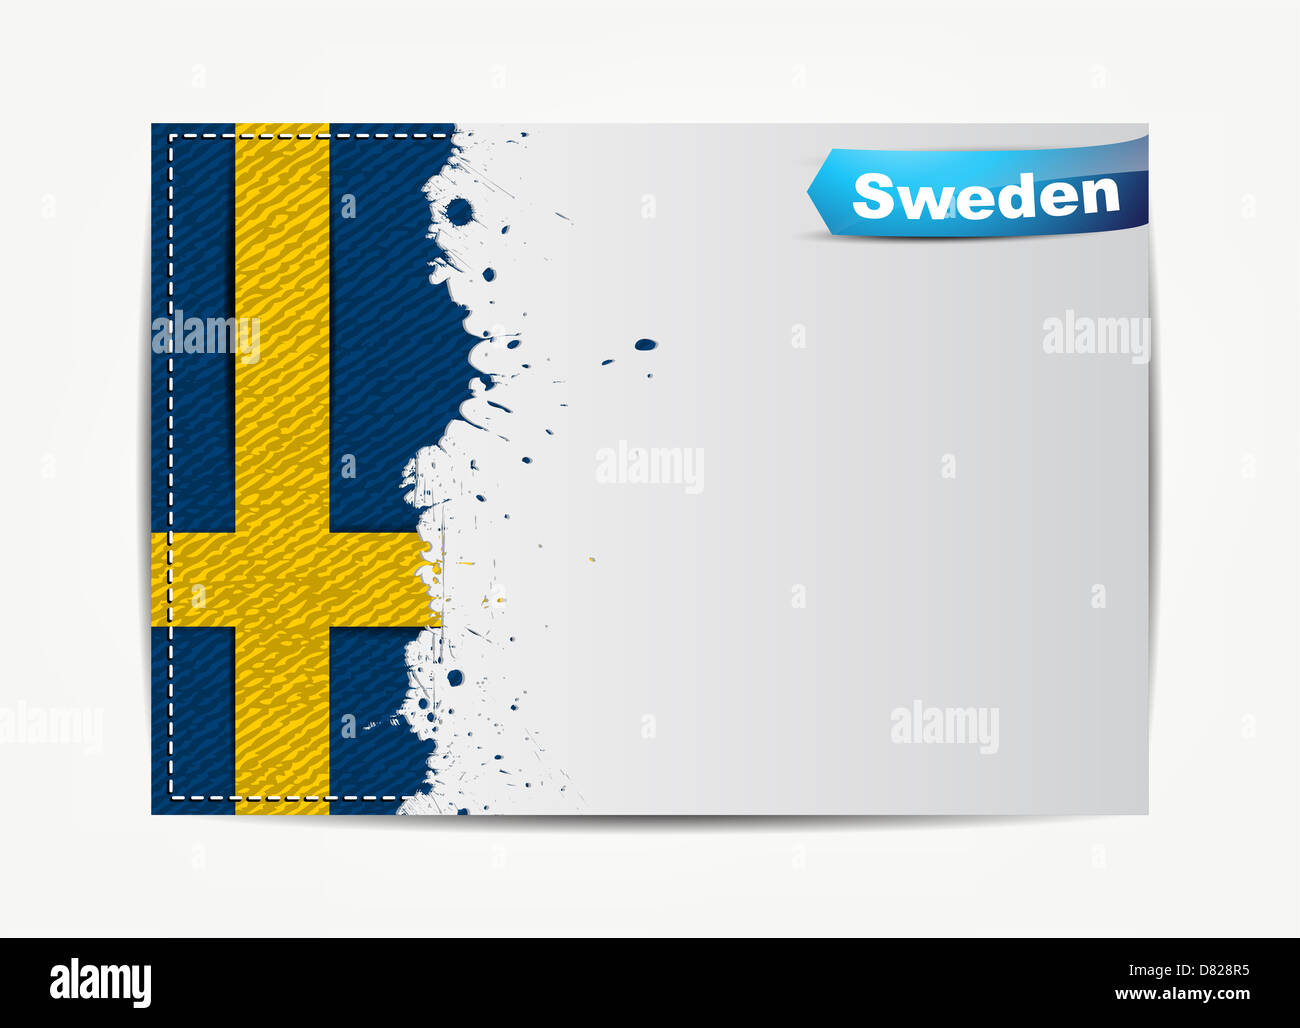 Stitched Sweden flag with grunge paper frame for your text. Stock Photo